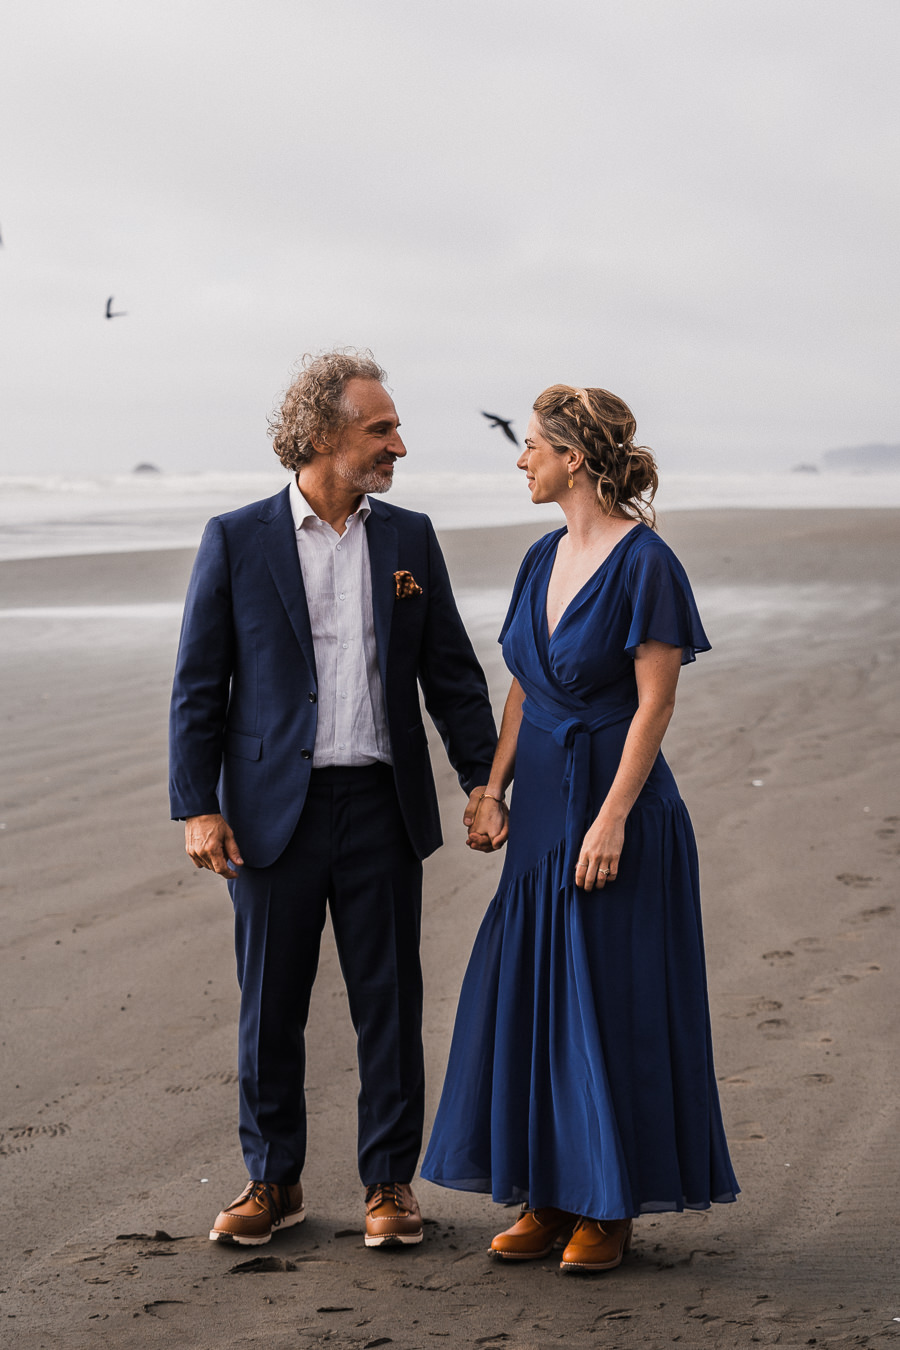 Bride and groom share a look after getting married on Kalaloch Beach as seagulls fly overhead